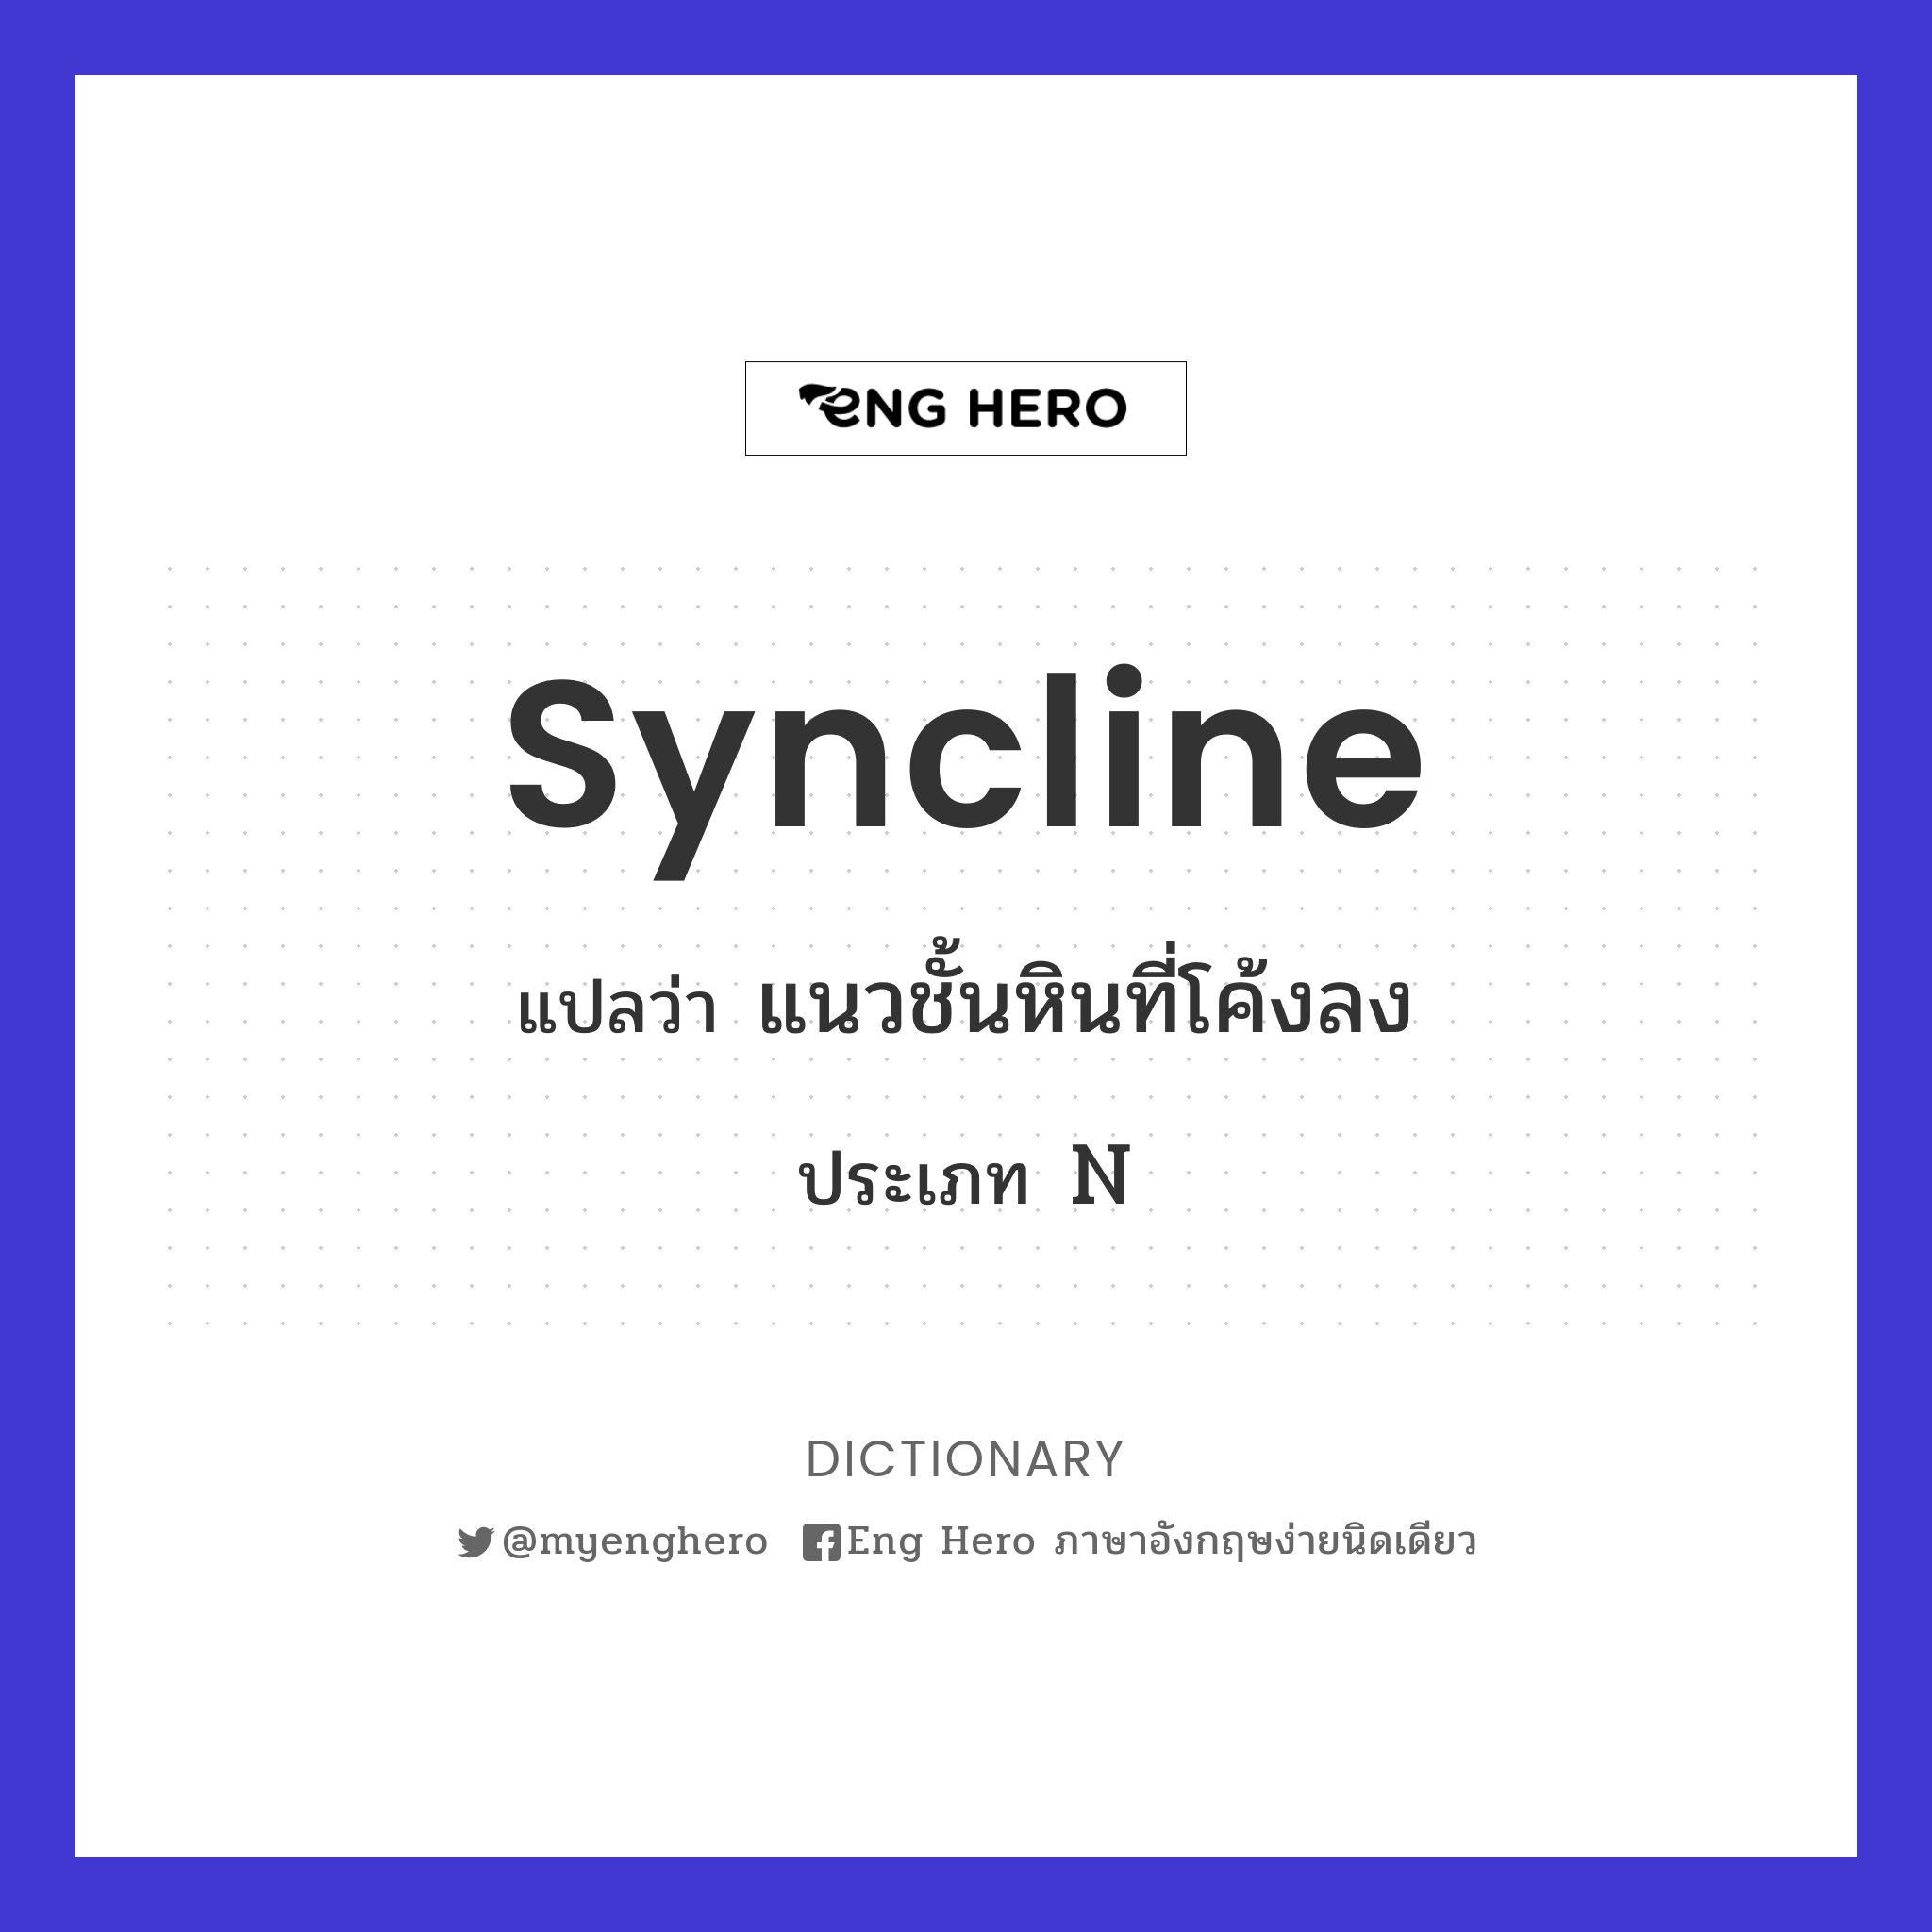 syncline